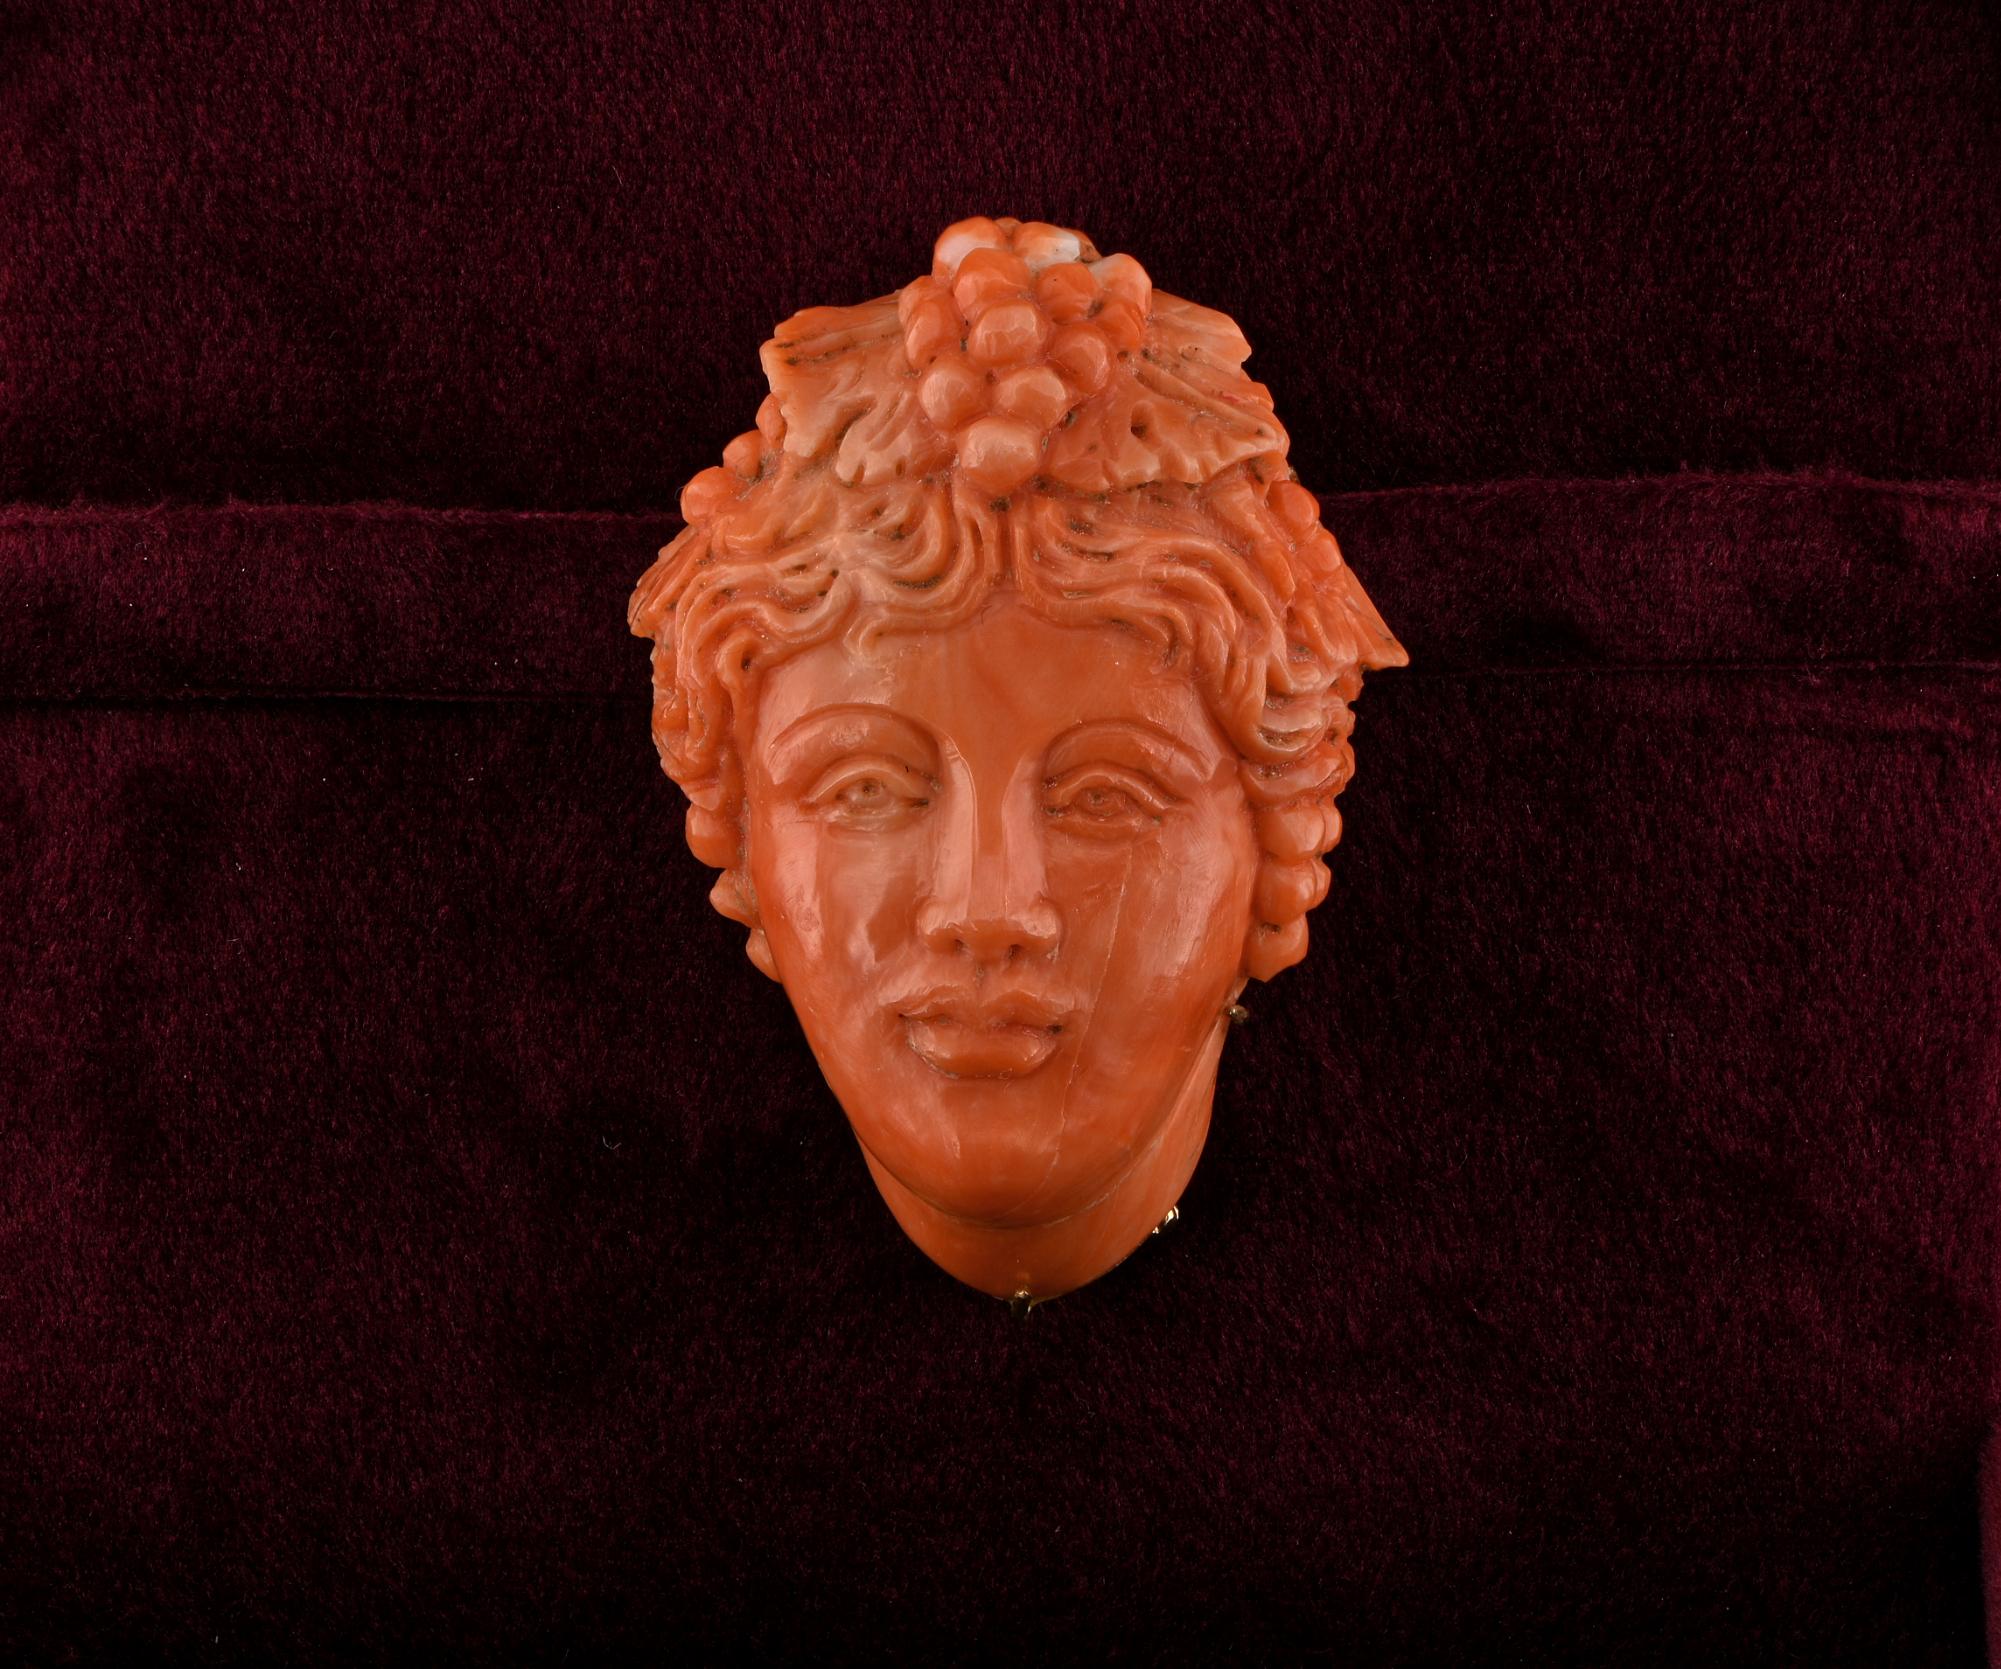 Coral Timeless Seduction
This absolutely superb antique Coral brooch is 1860/70 ca
Spectacular and important antique art piece of pretty large scale, skilfully hand carved during the time featuring the most beautiful Baccante face with rich waved